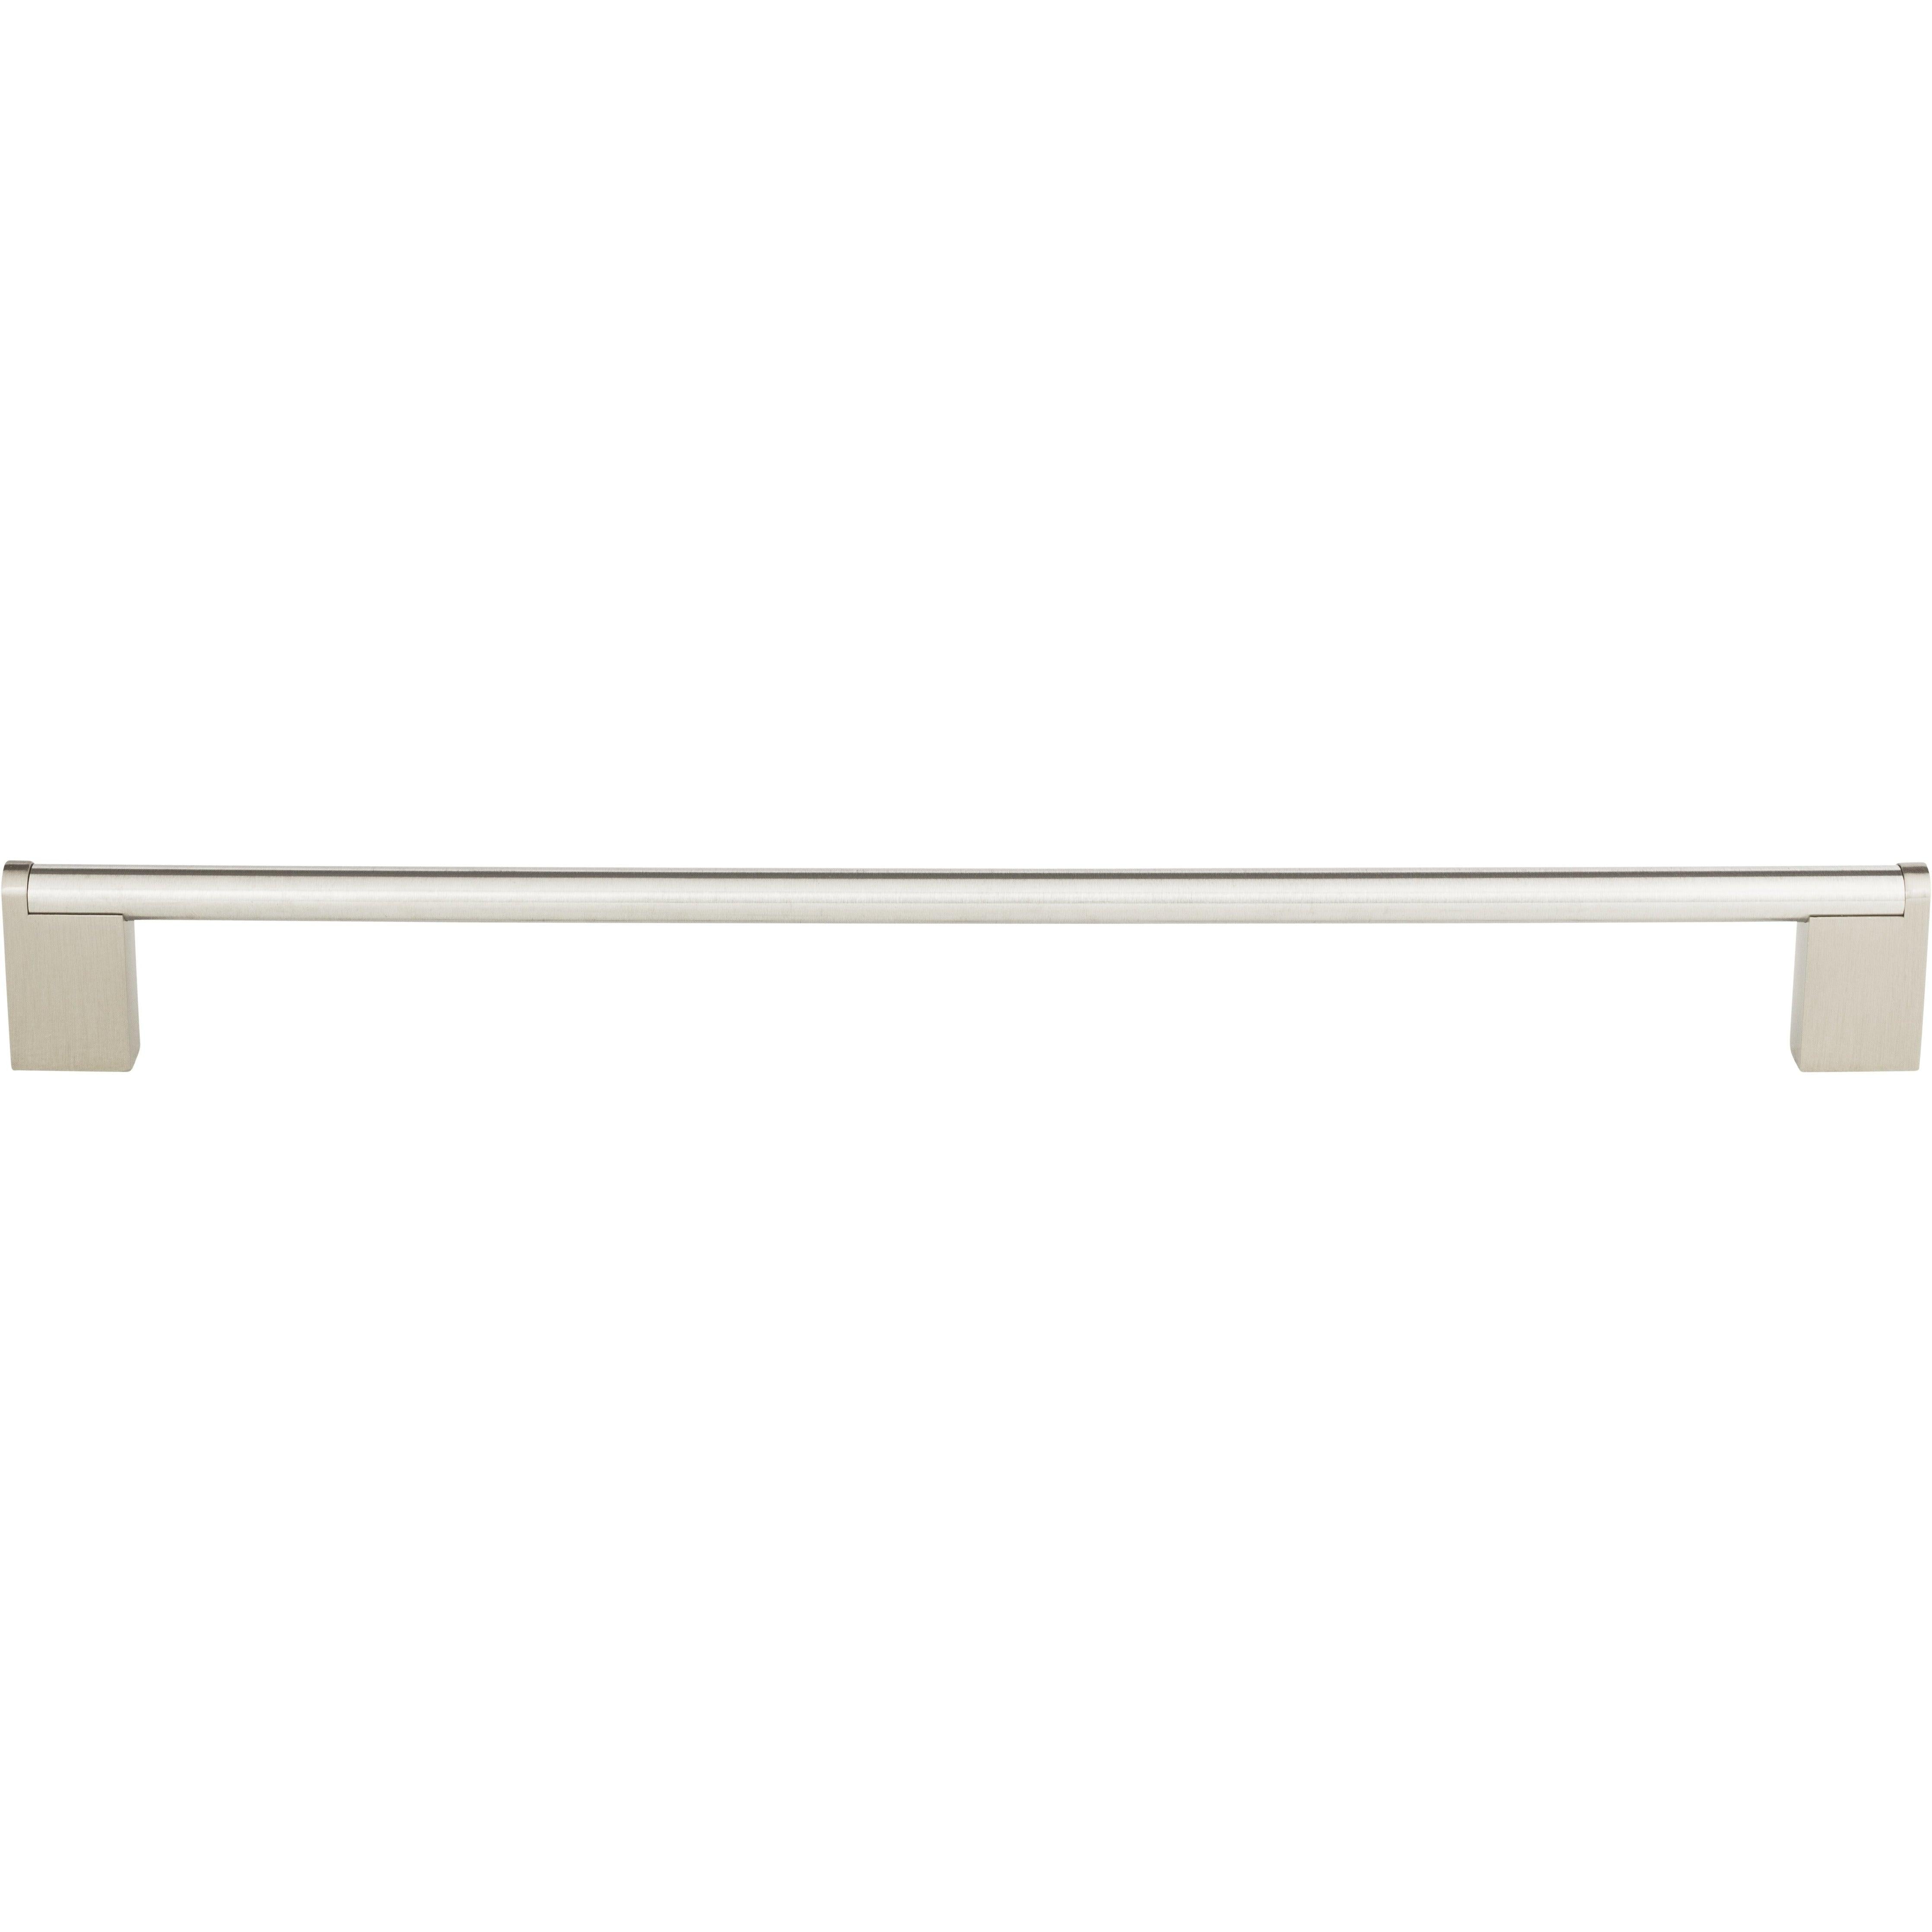 Atlas Homewares - Round 3 Point Pull - A859-SS | Montreal Lighting & Hardware